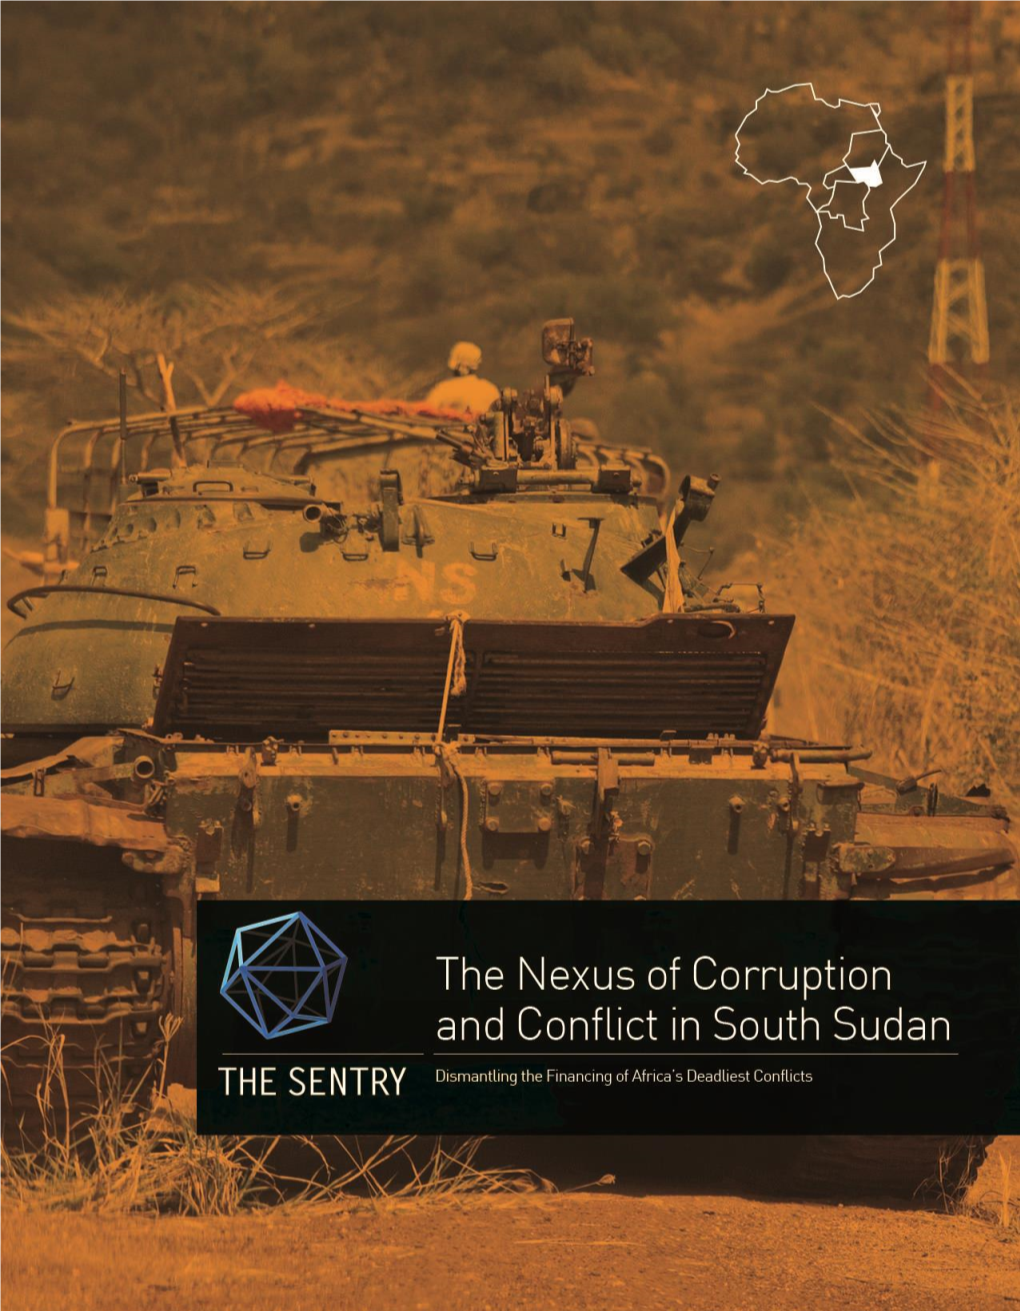 The Nexus of Corruption and Conflict in South Sudan. July 2015